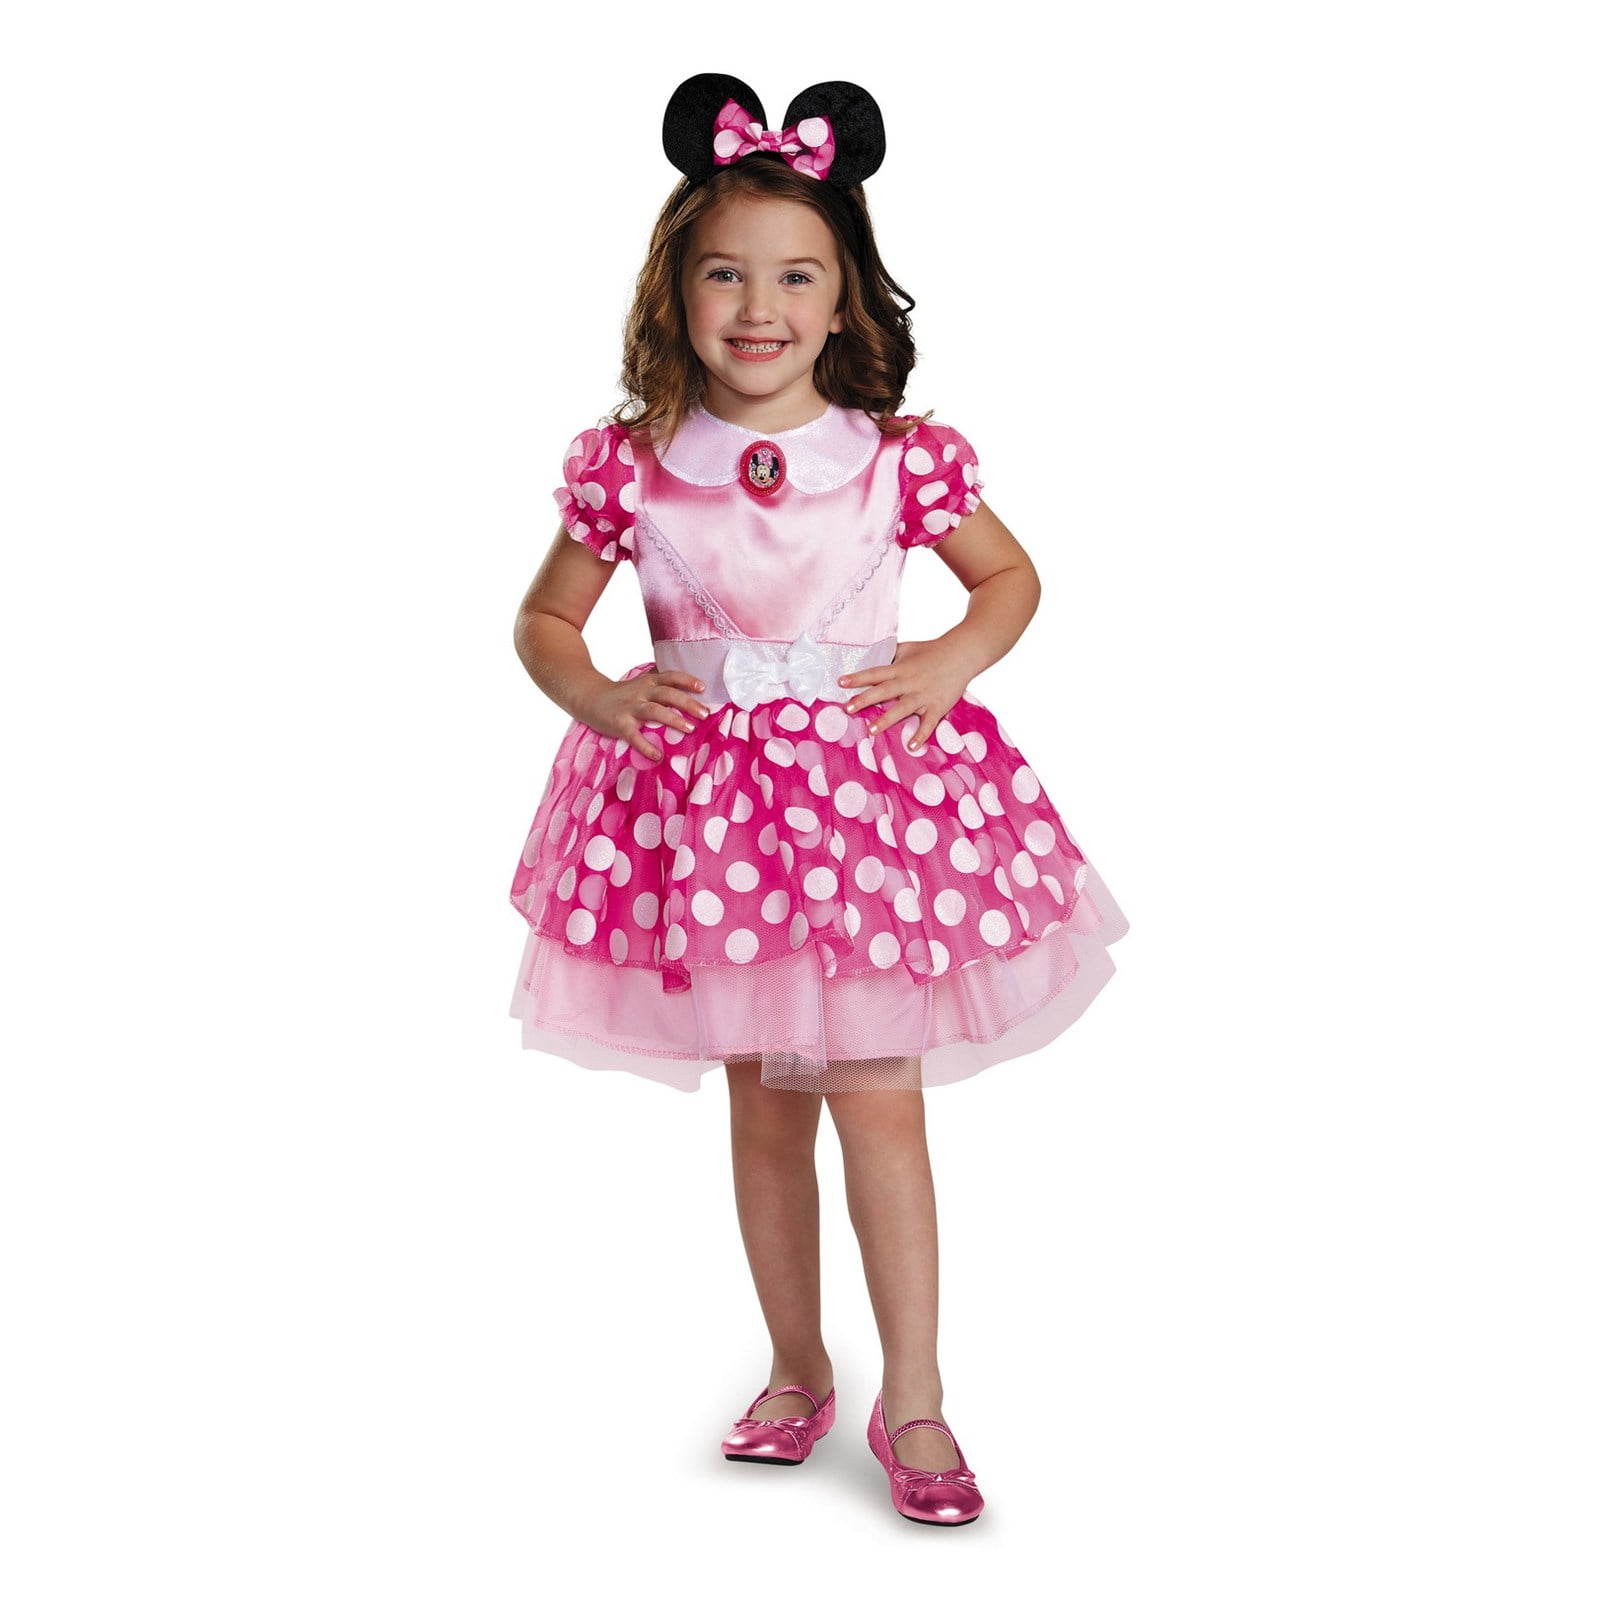 NEW Ladies Pink MINNIE Mouse Costume Fancy Dress Accessory Set Ears Tail HEN DO 